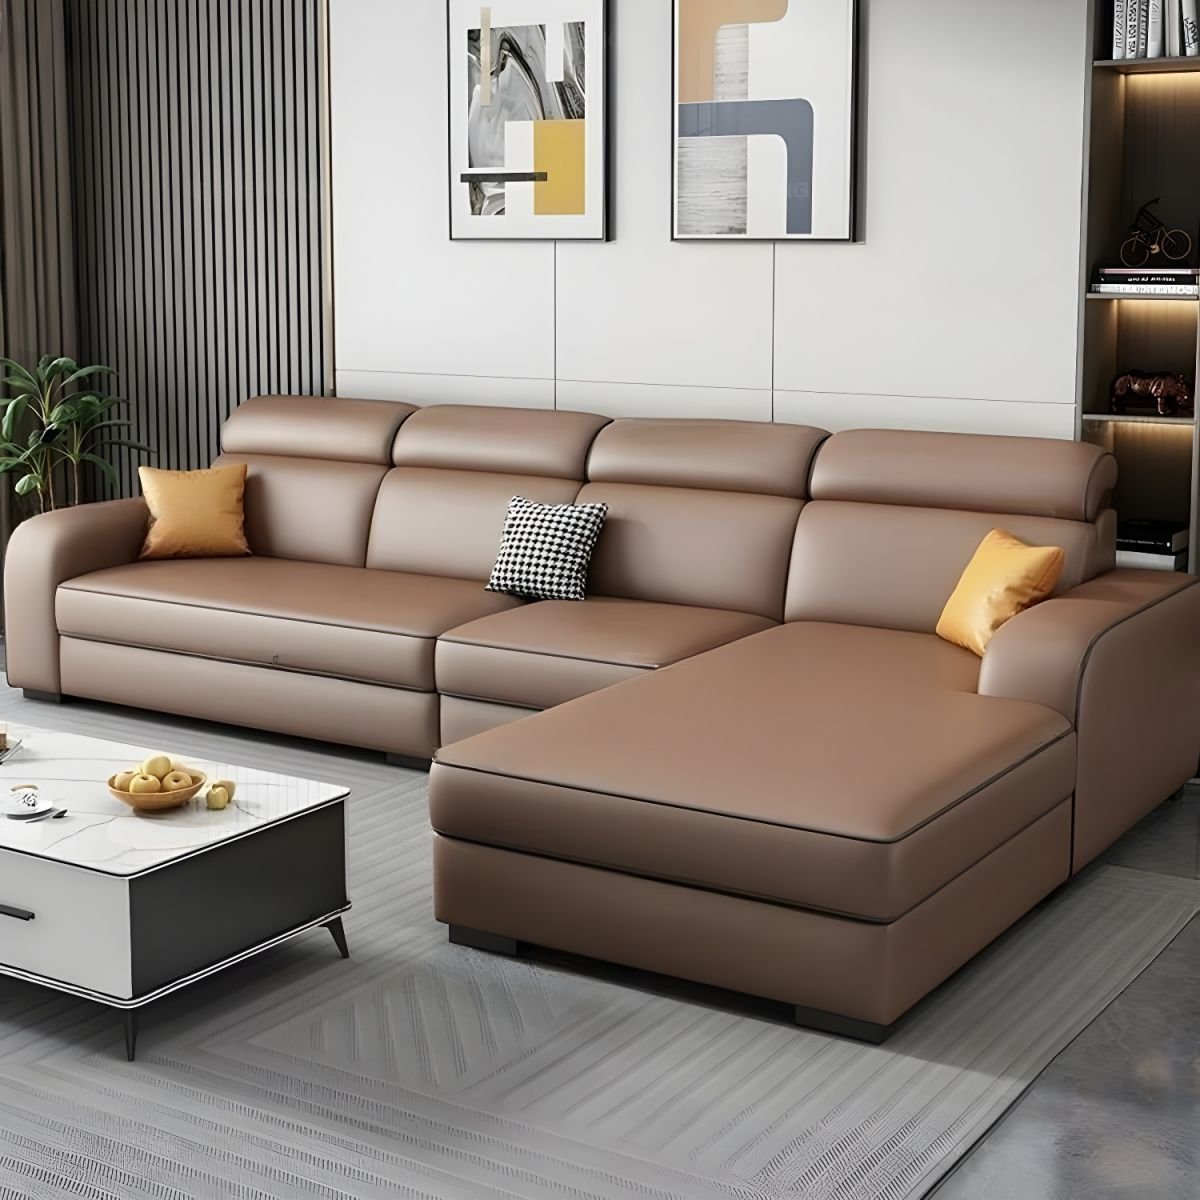 Contemporary Sectional Sofa with Adjustable Pillow and Scratch Resistant Upholstery - Anti Cat Scratch Leather 108"L x 63"W x 31"H Brown